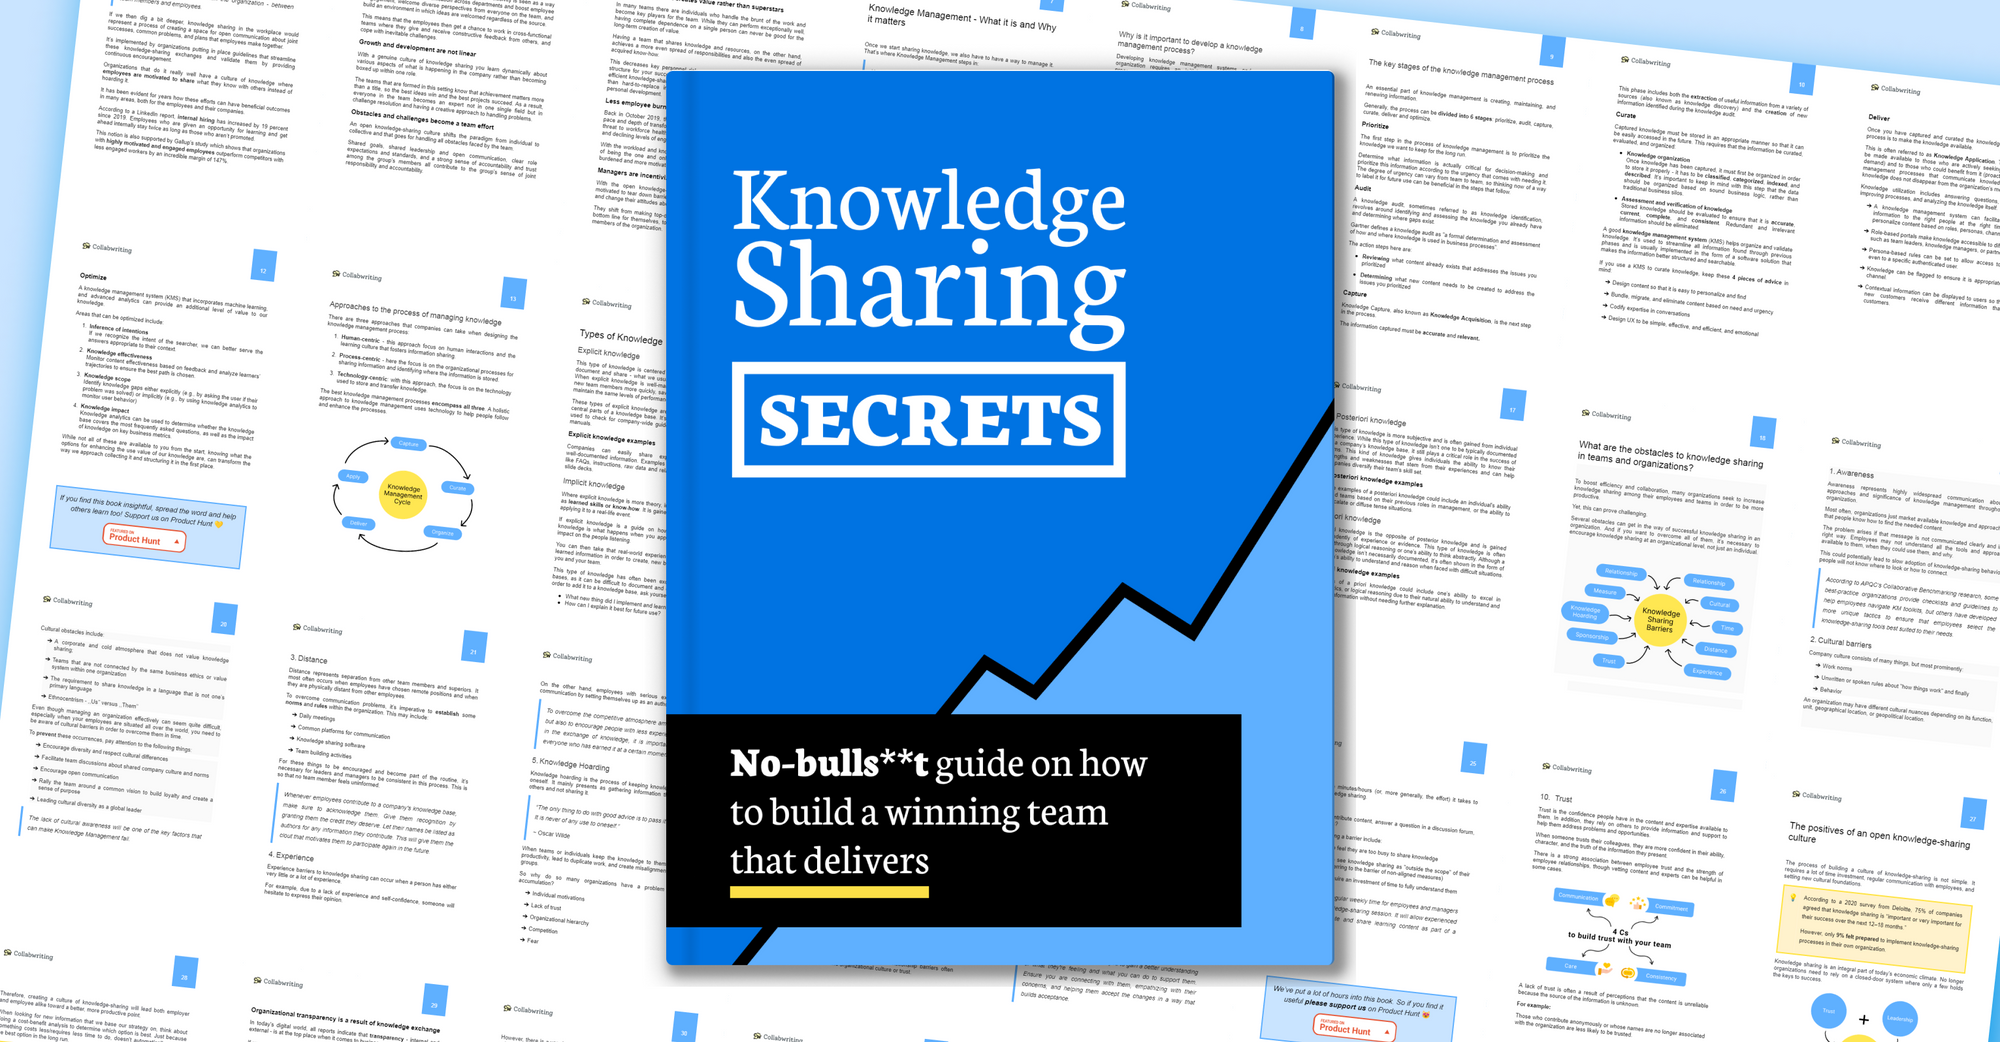 Knowledge Sharing - Strategies for building a unicorn team